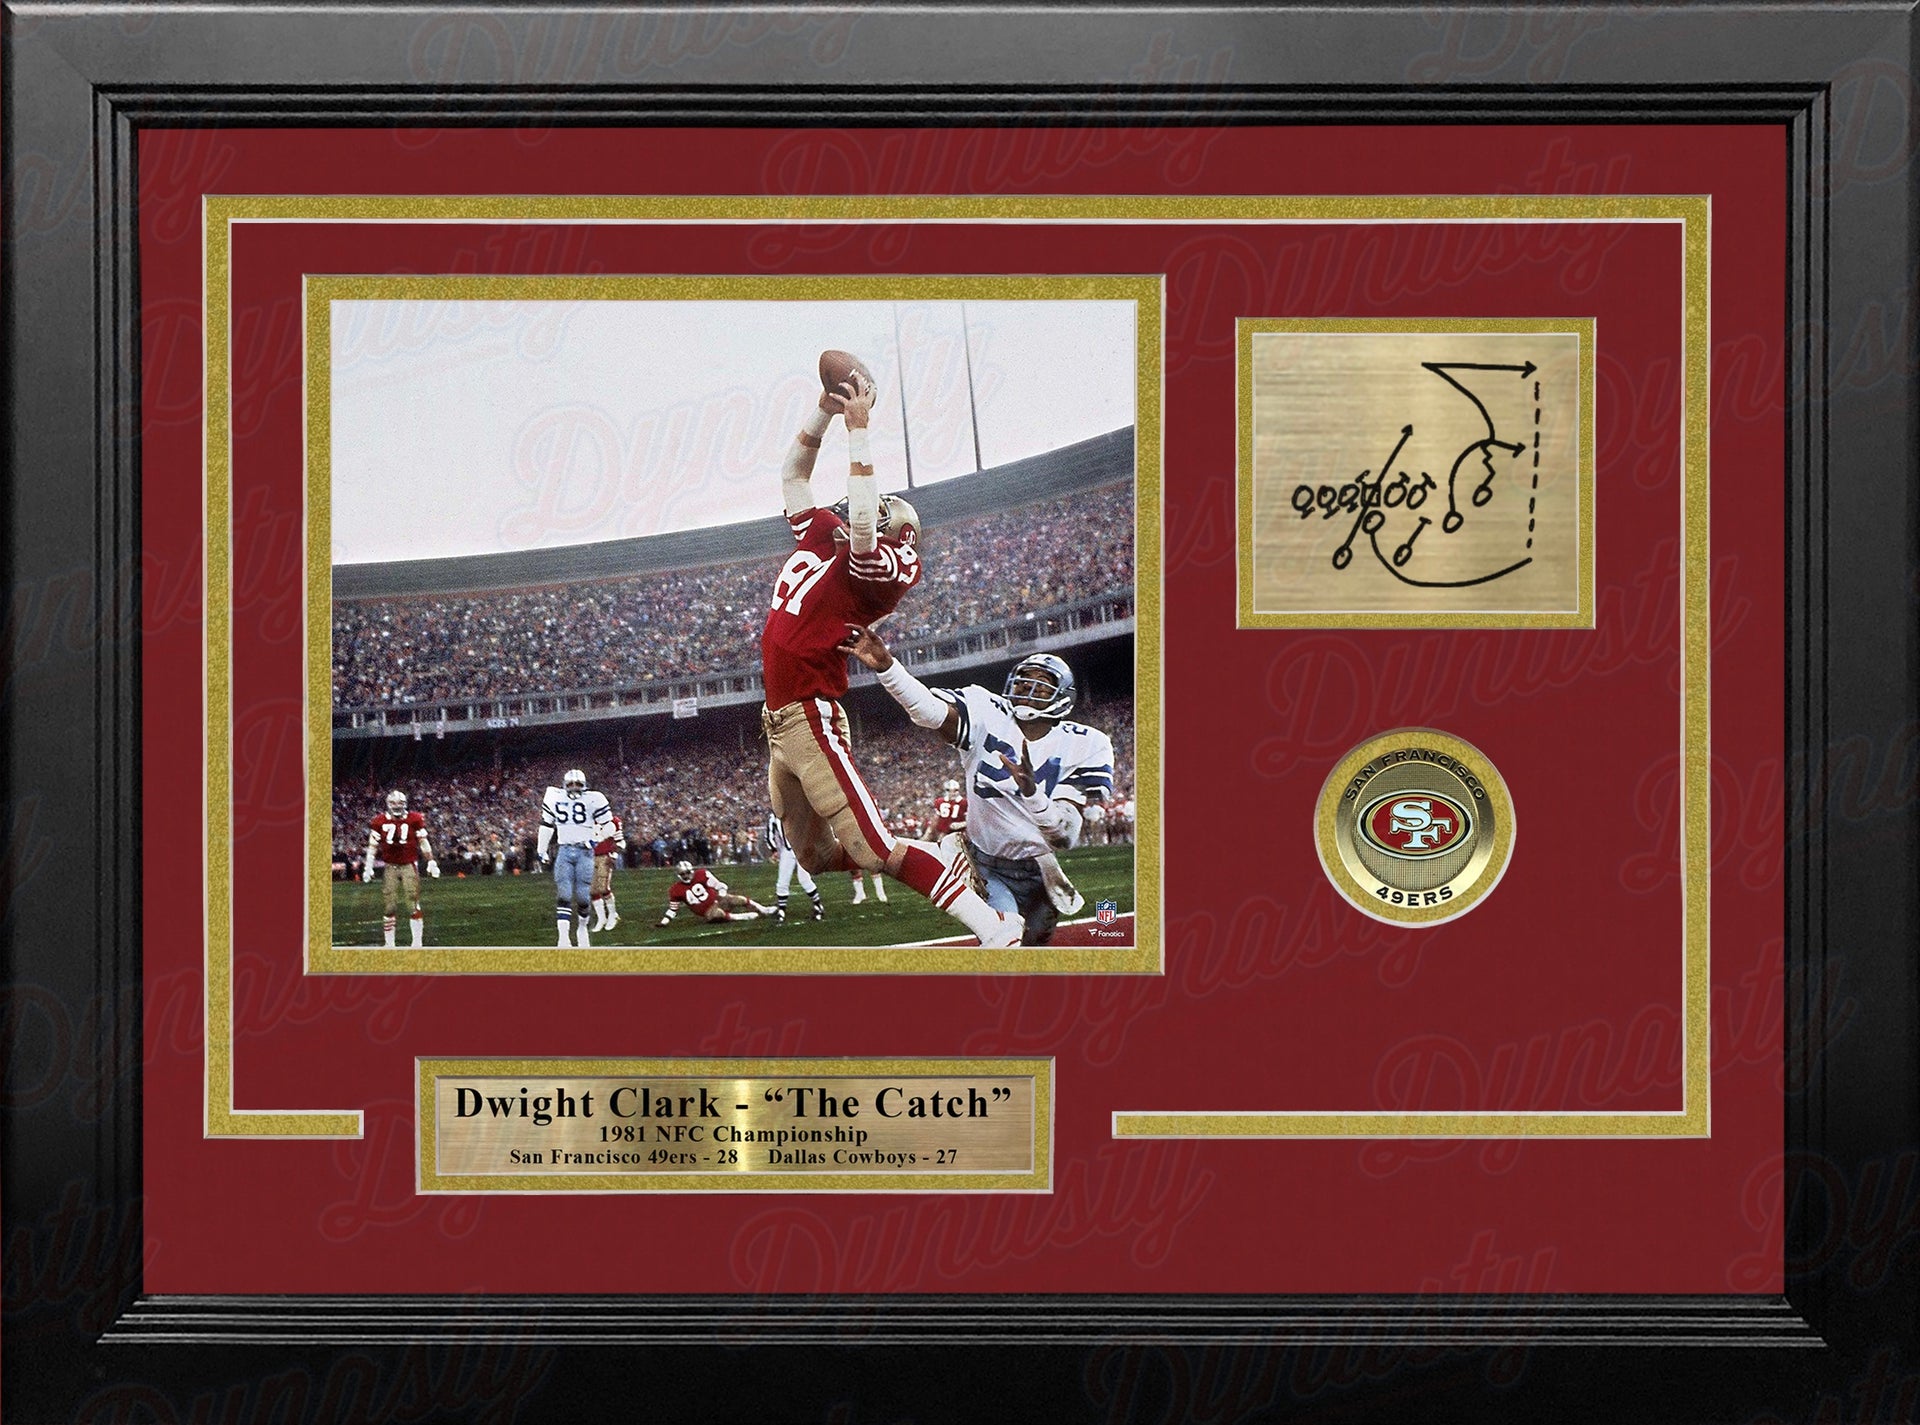 Dwight Clark 1981 NFC Championship Catch San Francisco 49ers 8x10 Framed Photo with Engraved Play - Dynasty Sports & Framing 